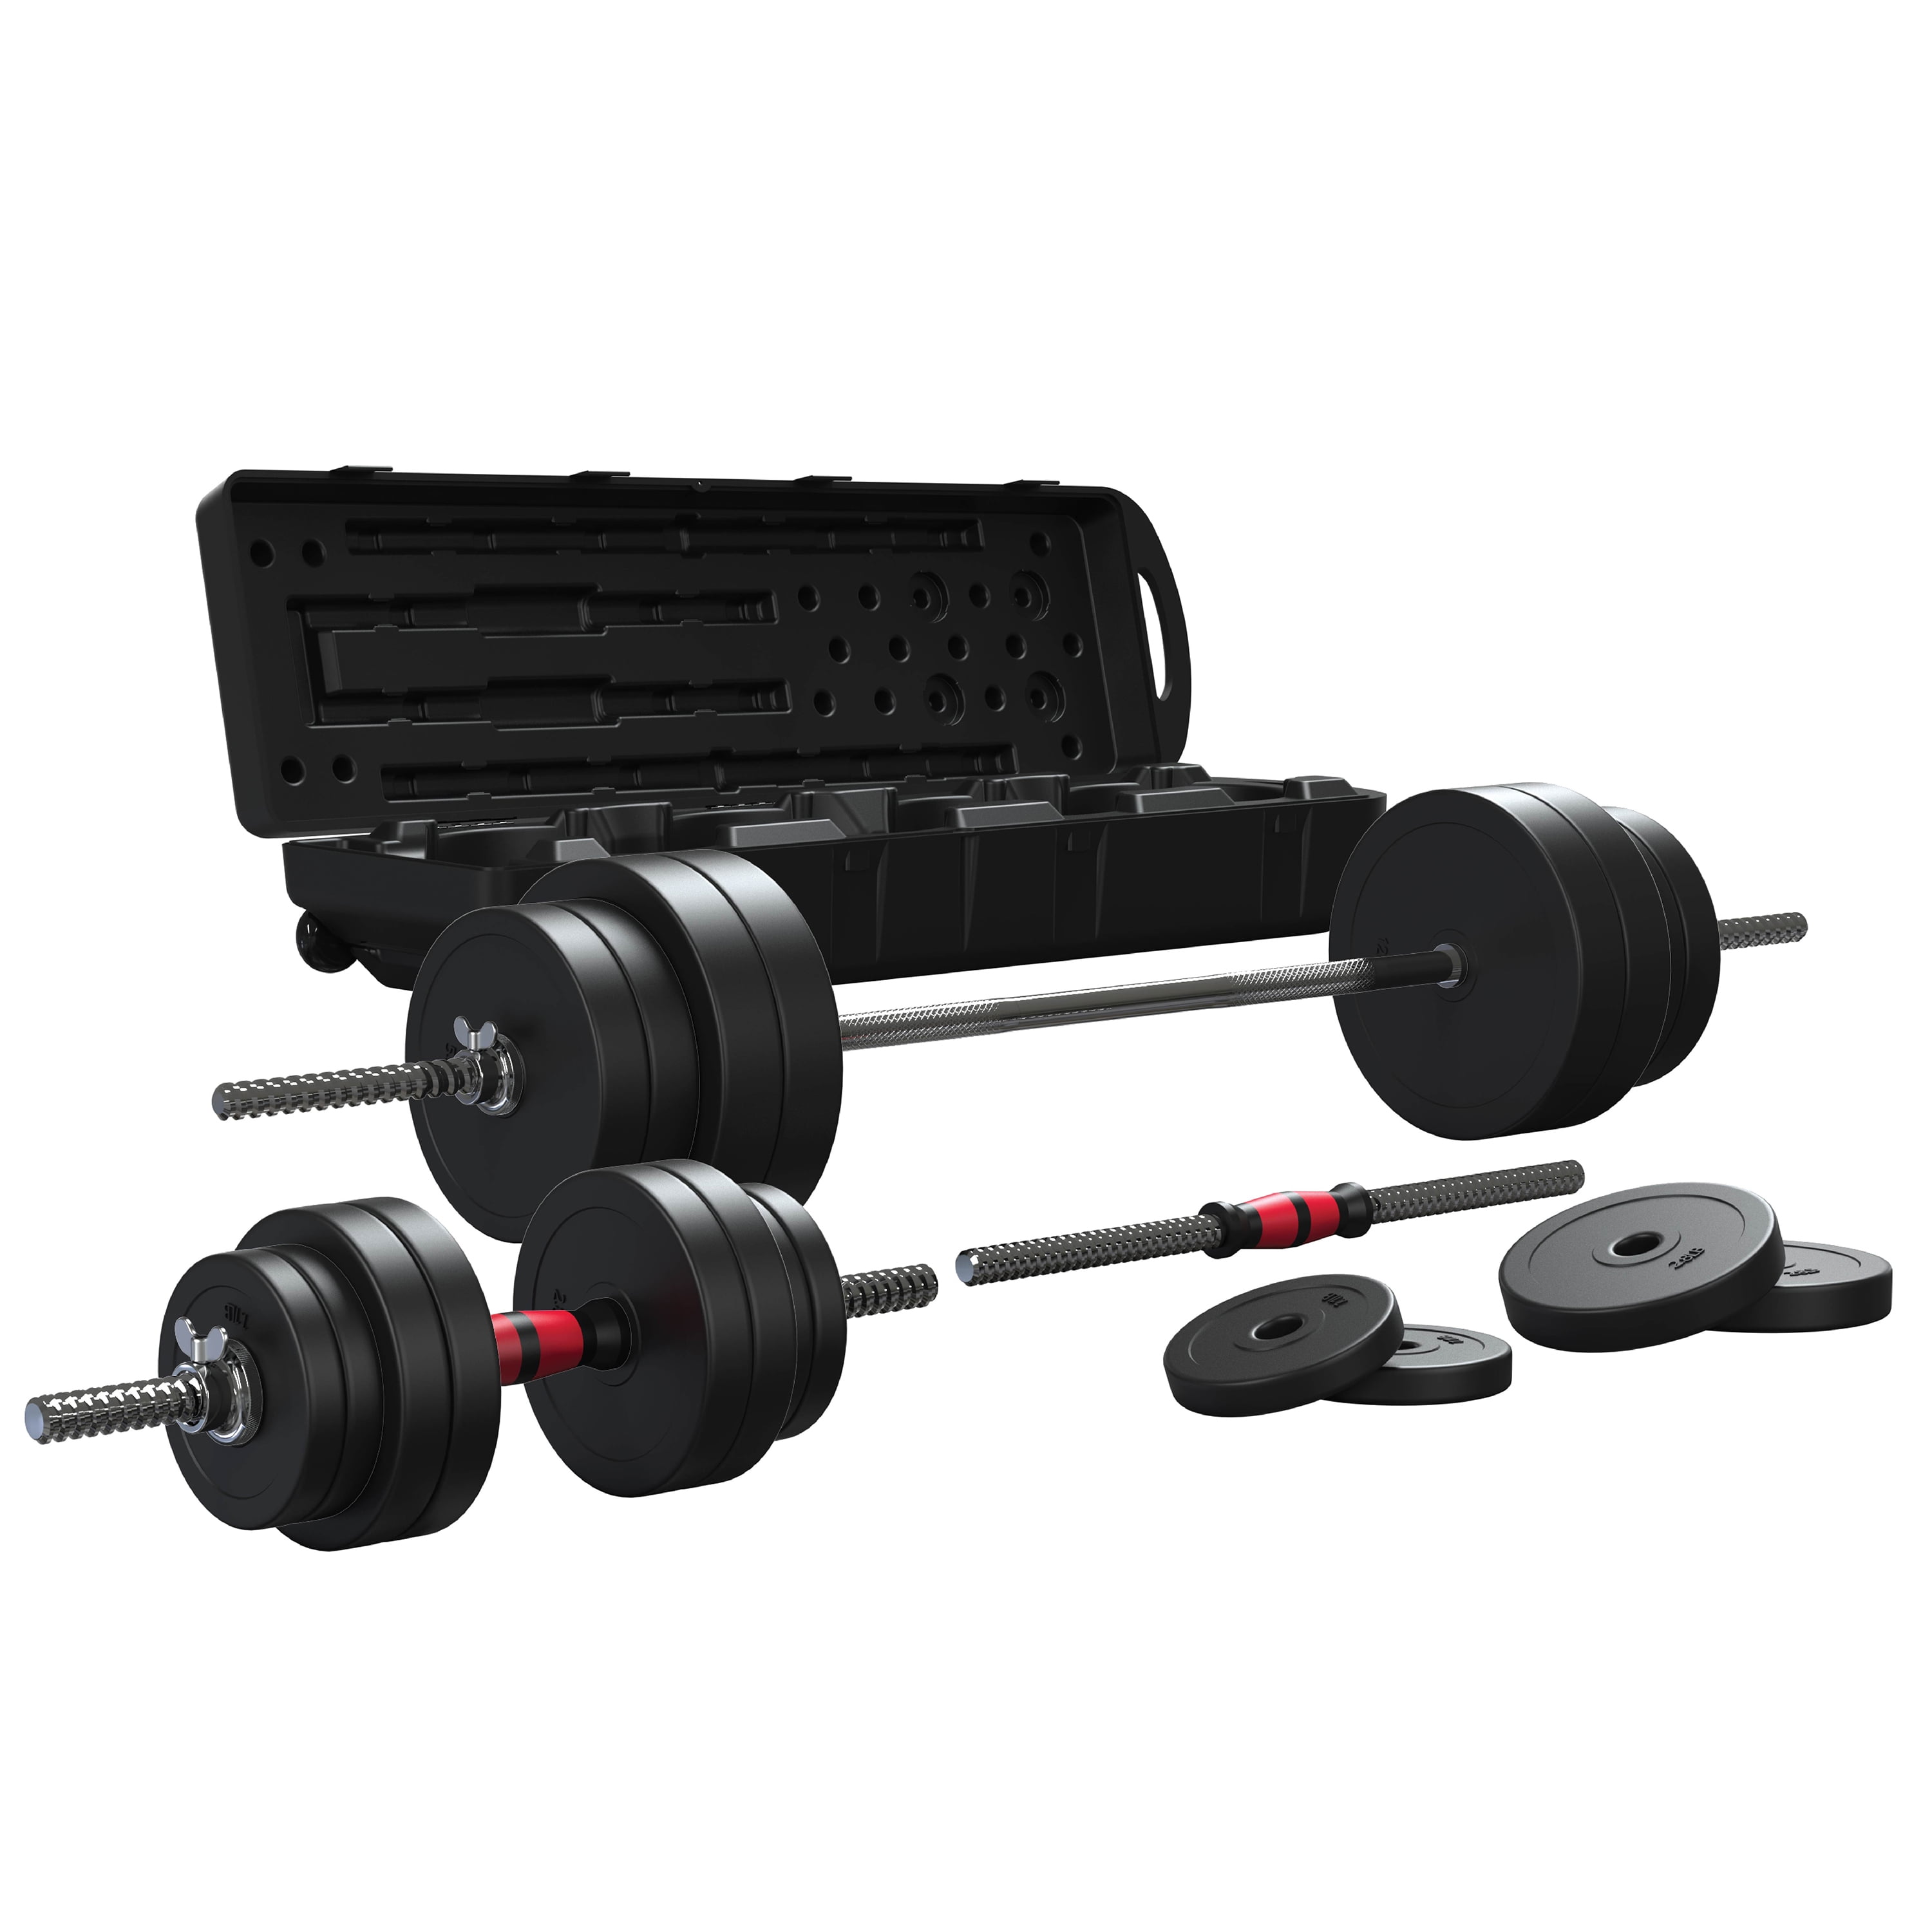 FitRx SmartBell Gym 2-in-1 Barbell & Dumbbell Set, Interchangeable  Adjustable Dumbbells and Barbell Weight Set, 100lbs., Black